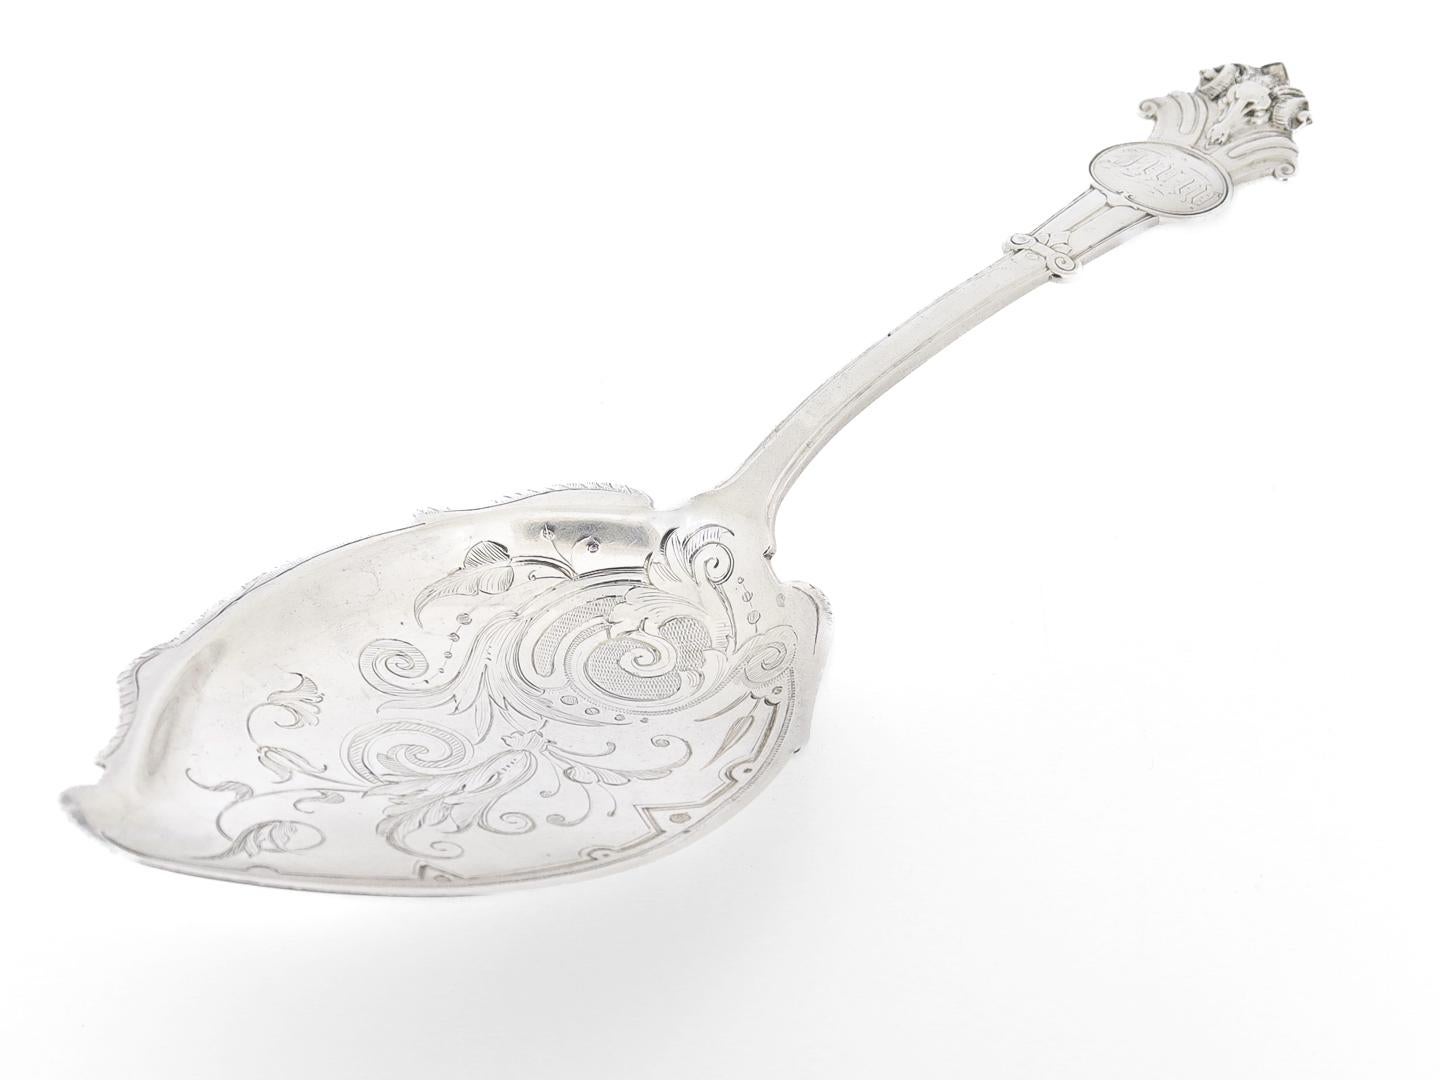 A fine antique silver ice cream slice or server.

Made by John Wendt and retailed by J.E. Caldwell of Philadelphia, Pennsylvania.

With brite cut floral decoration to the bowl and a ram's head to the handle.

Monogrammed just beneath the ram's head